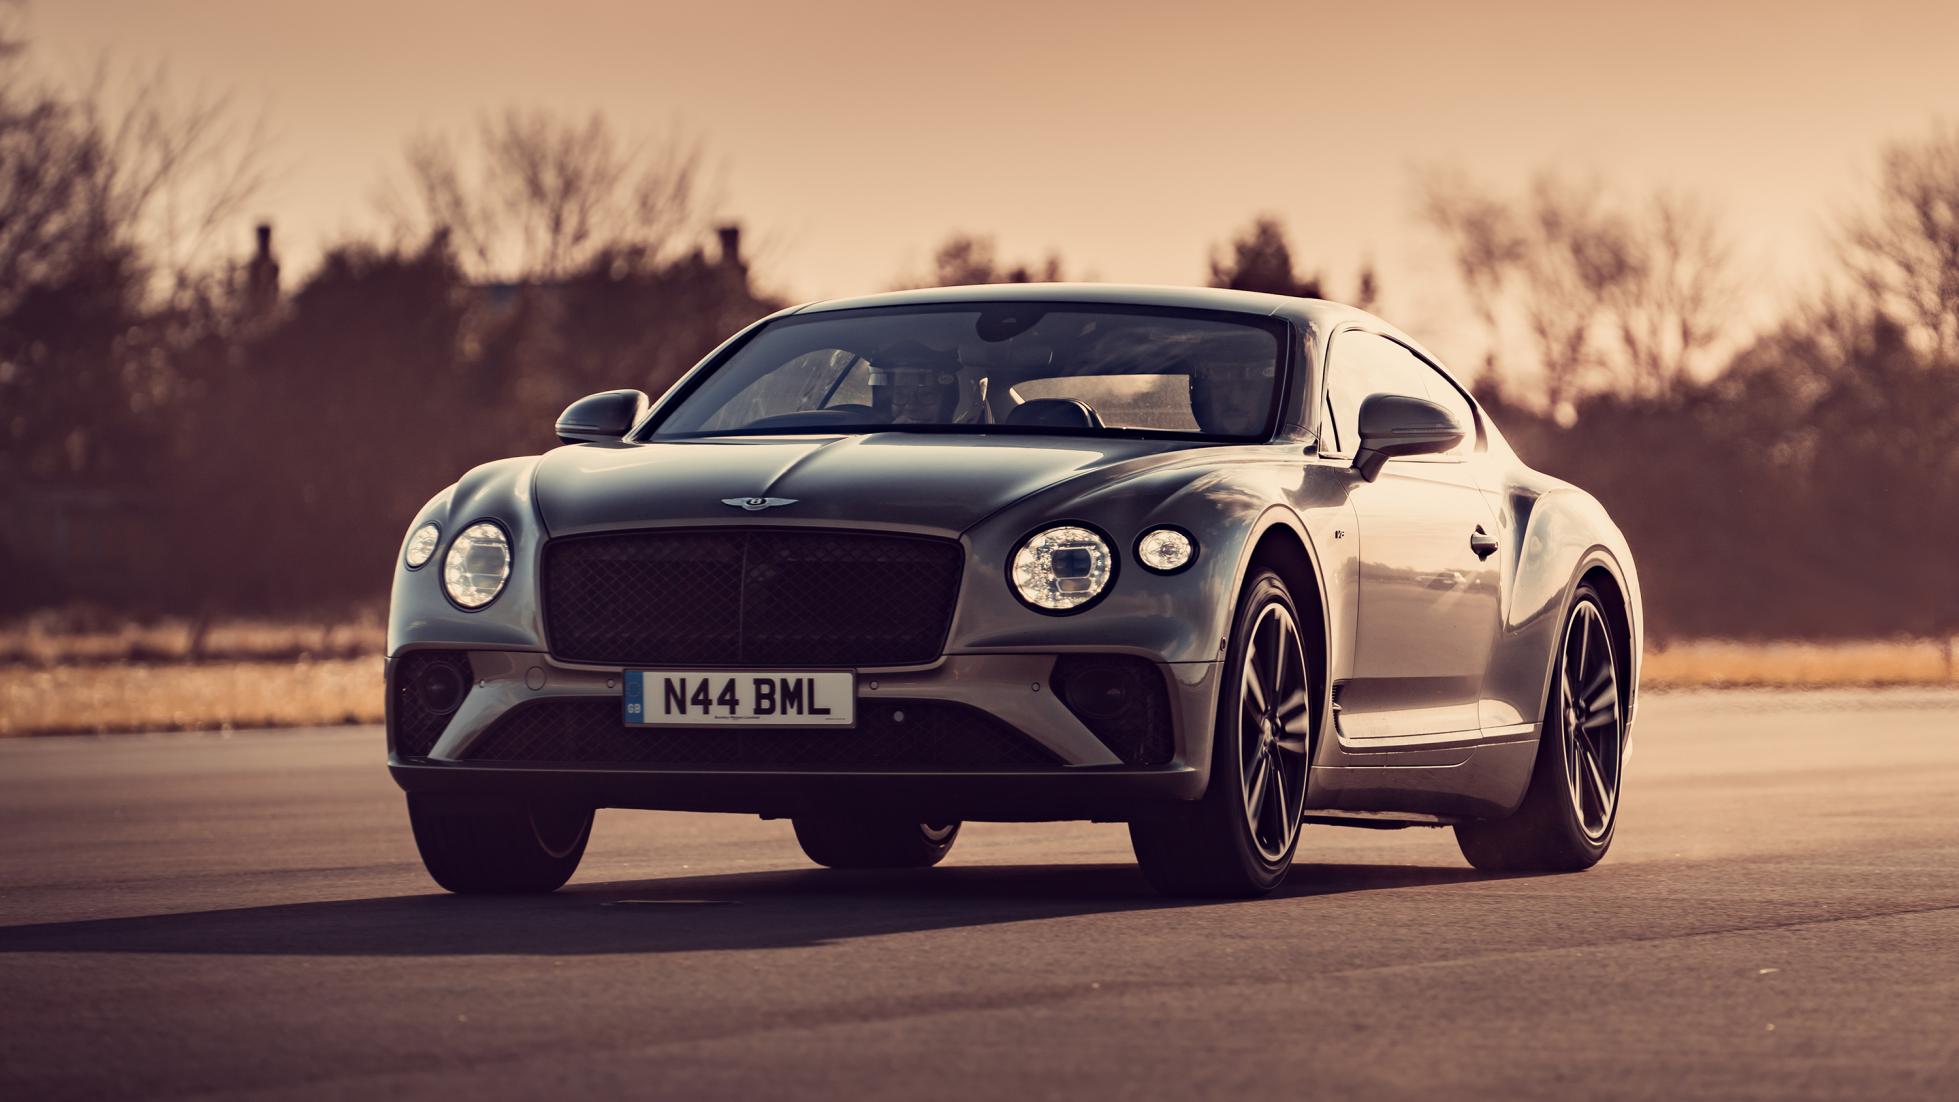 Bentley Continental GT review: is the V8 more fun?